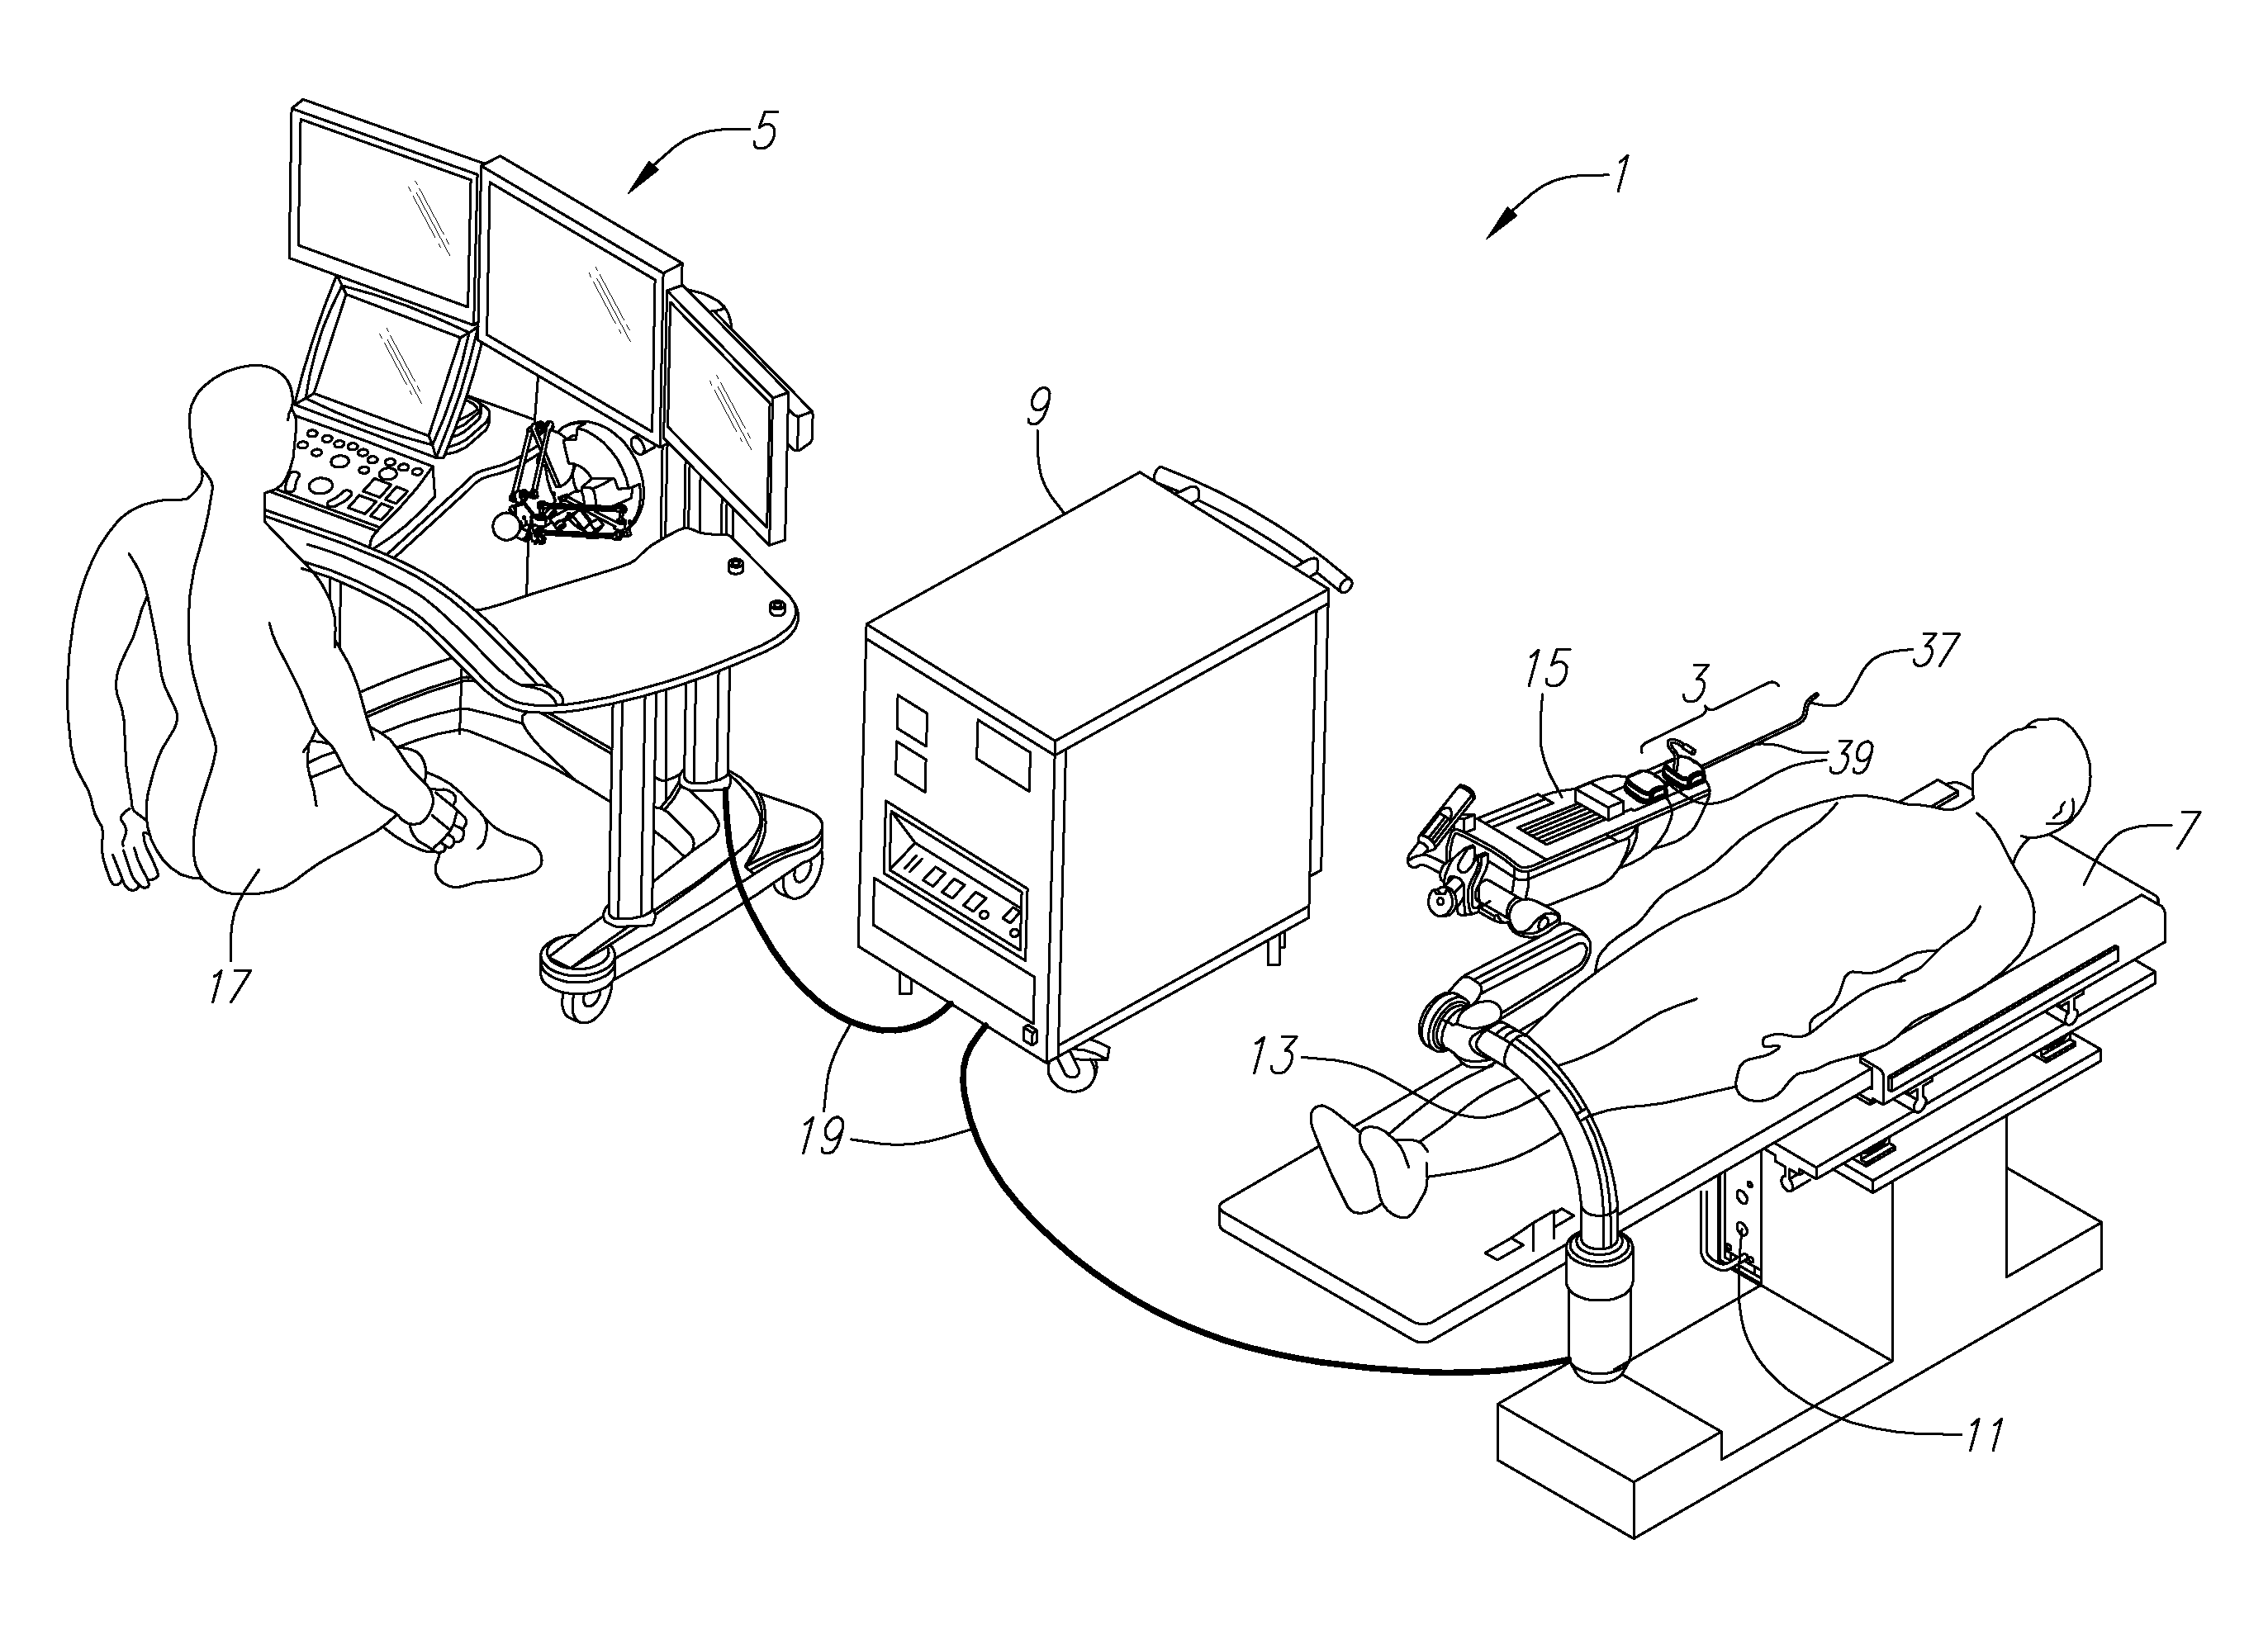 Interface assembly for controlling orientation of robotically controlled medical instrument